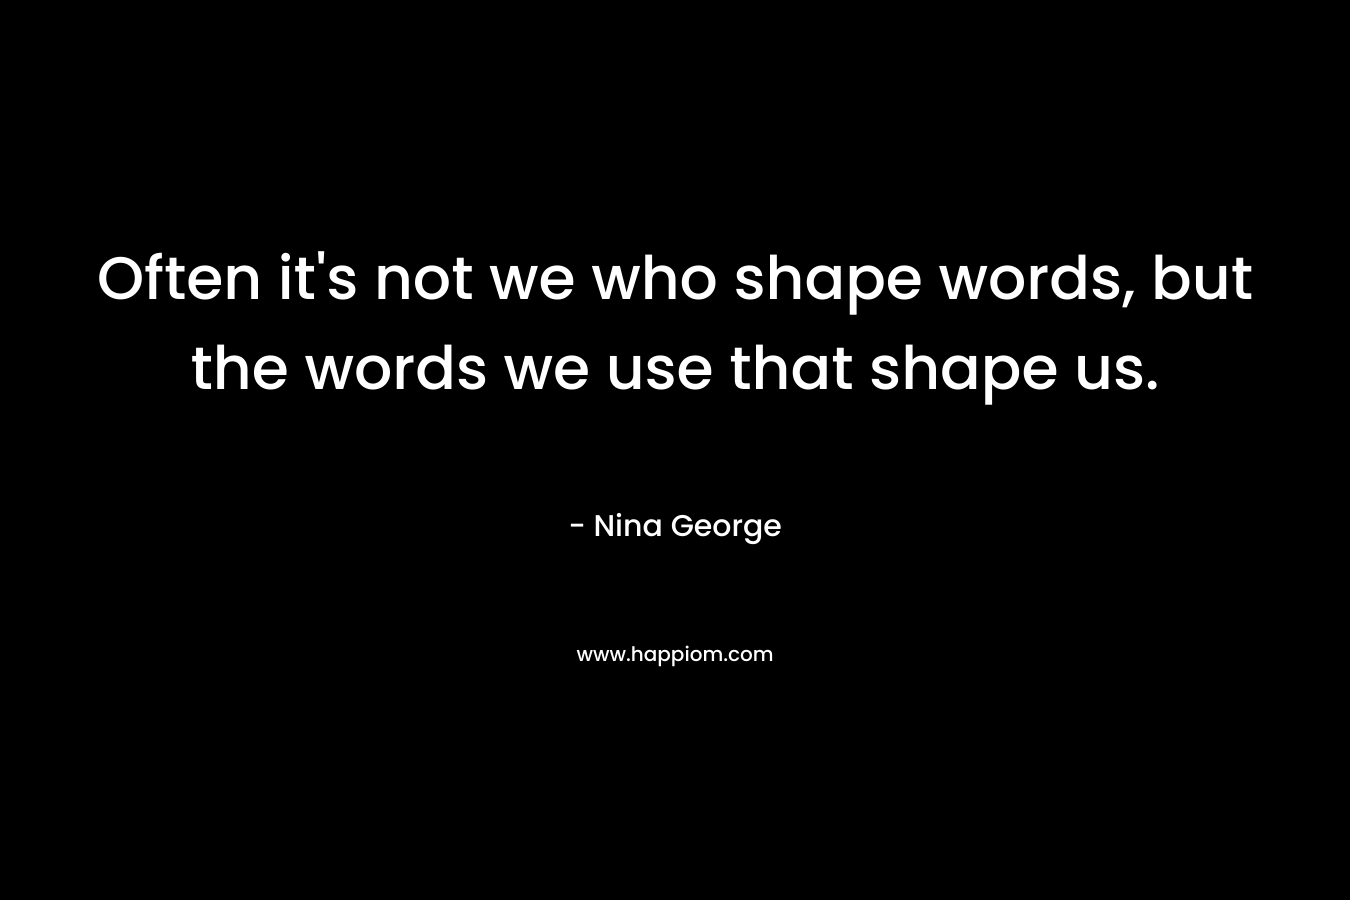 Often it’s not we who shape words, but the words we use that shape us. – Nina George